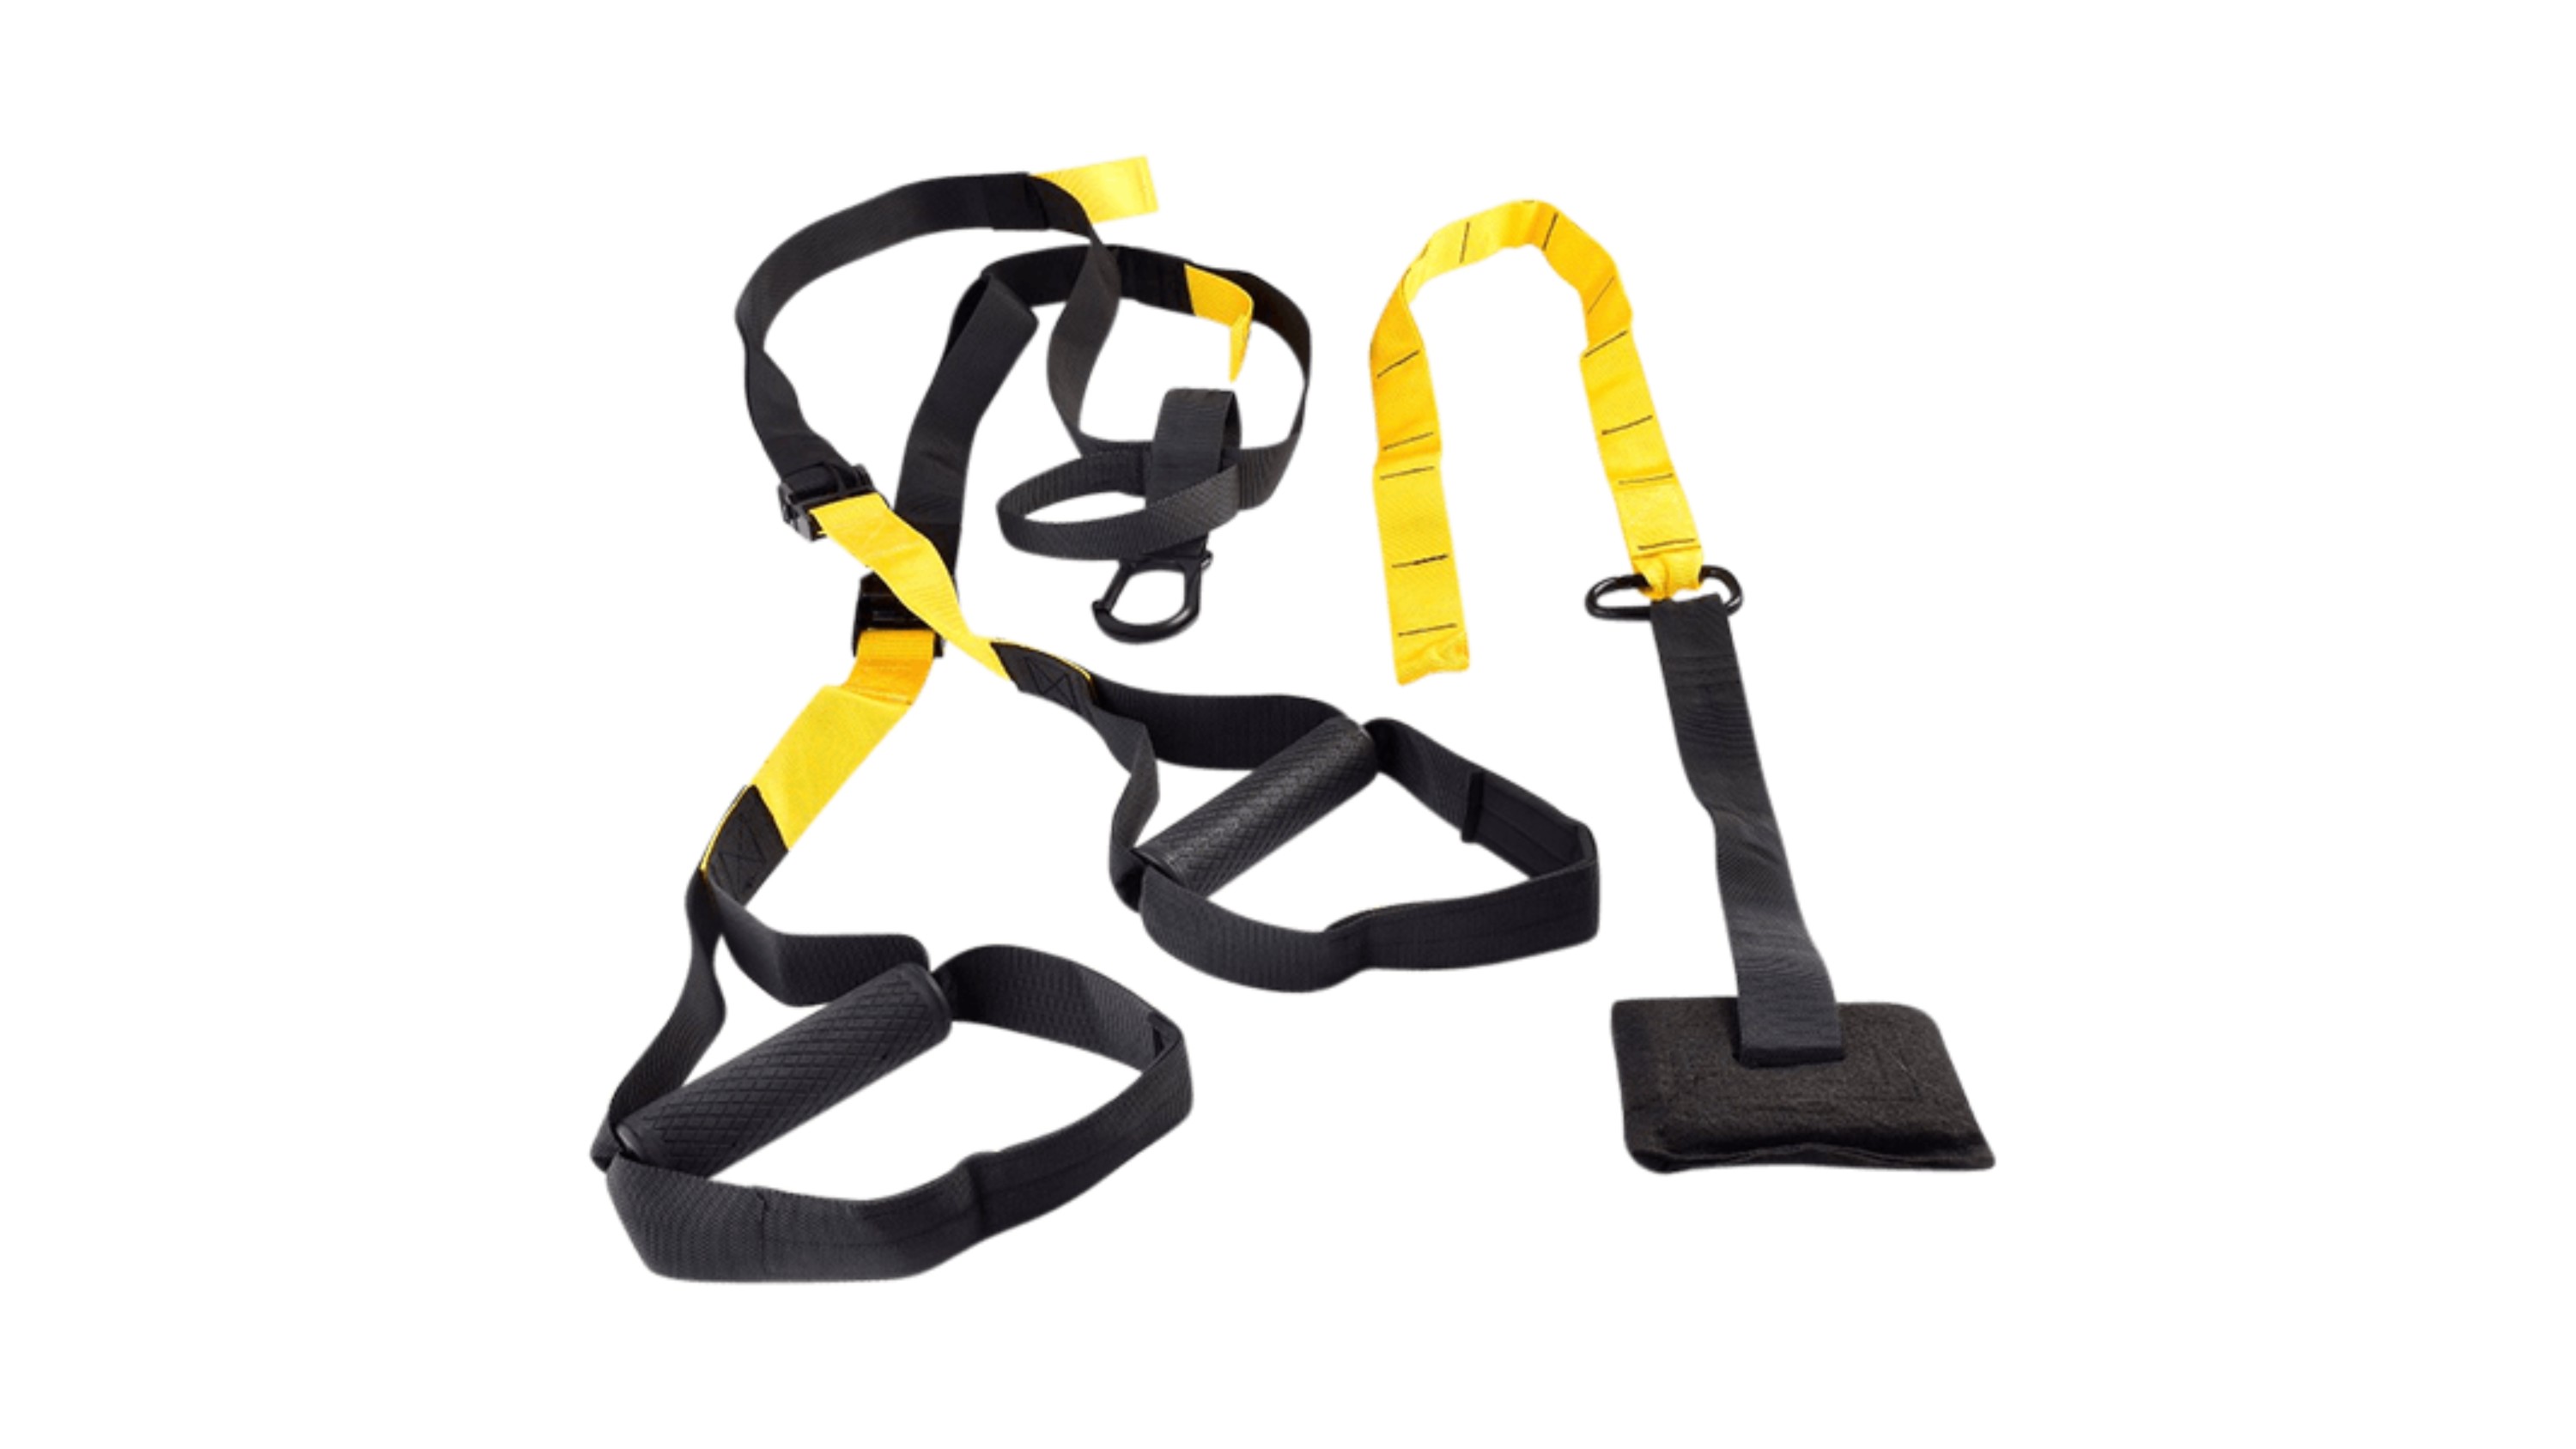 This TRX can be used for different exercises to increase strength and mobility